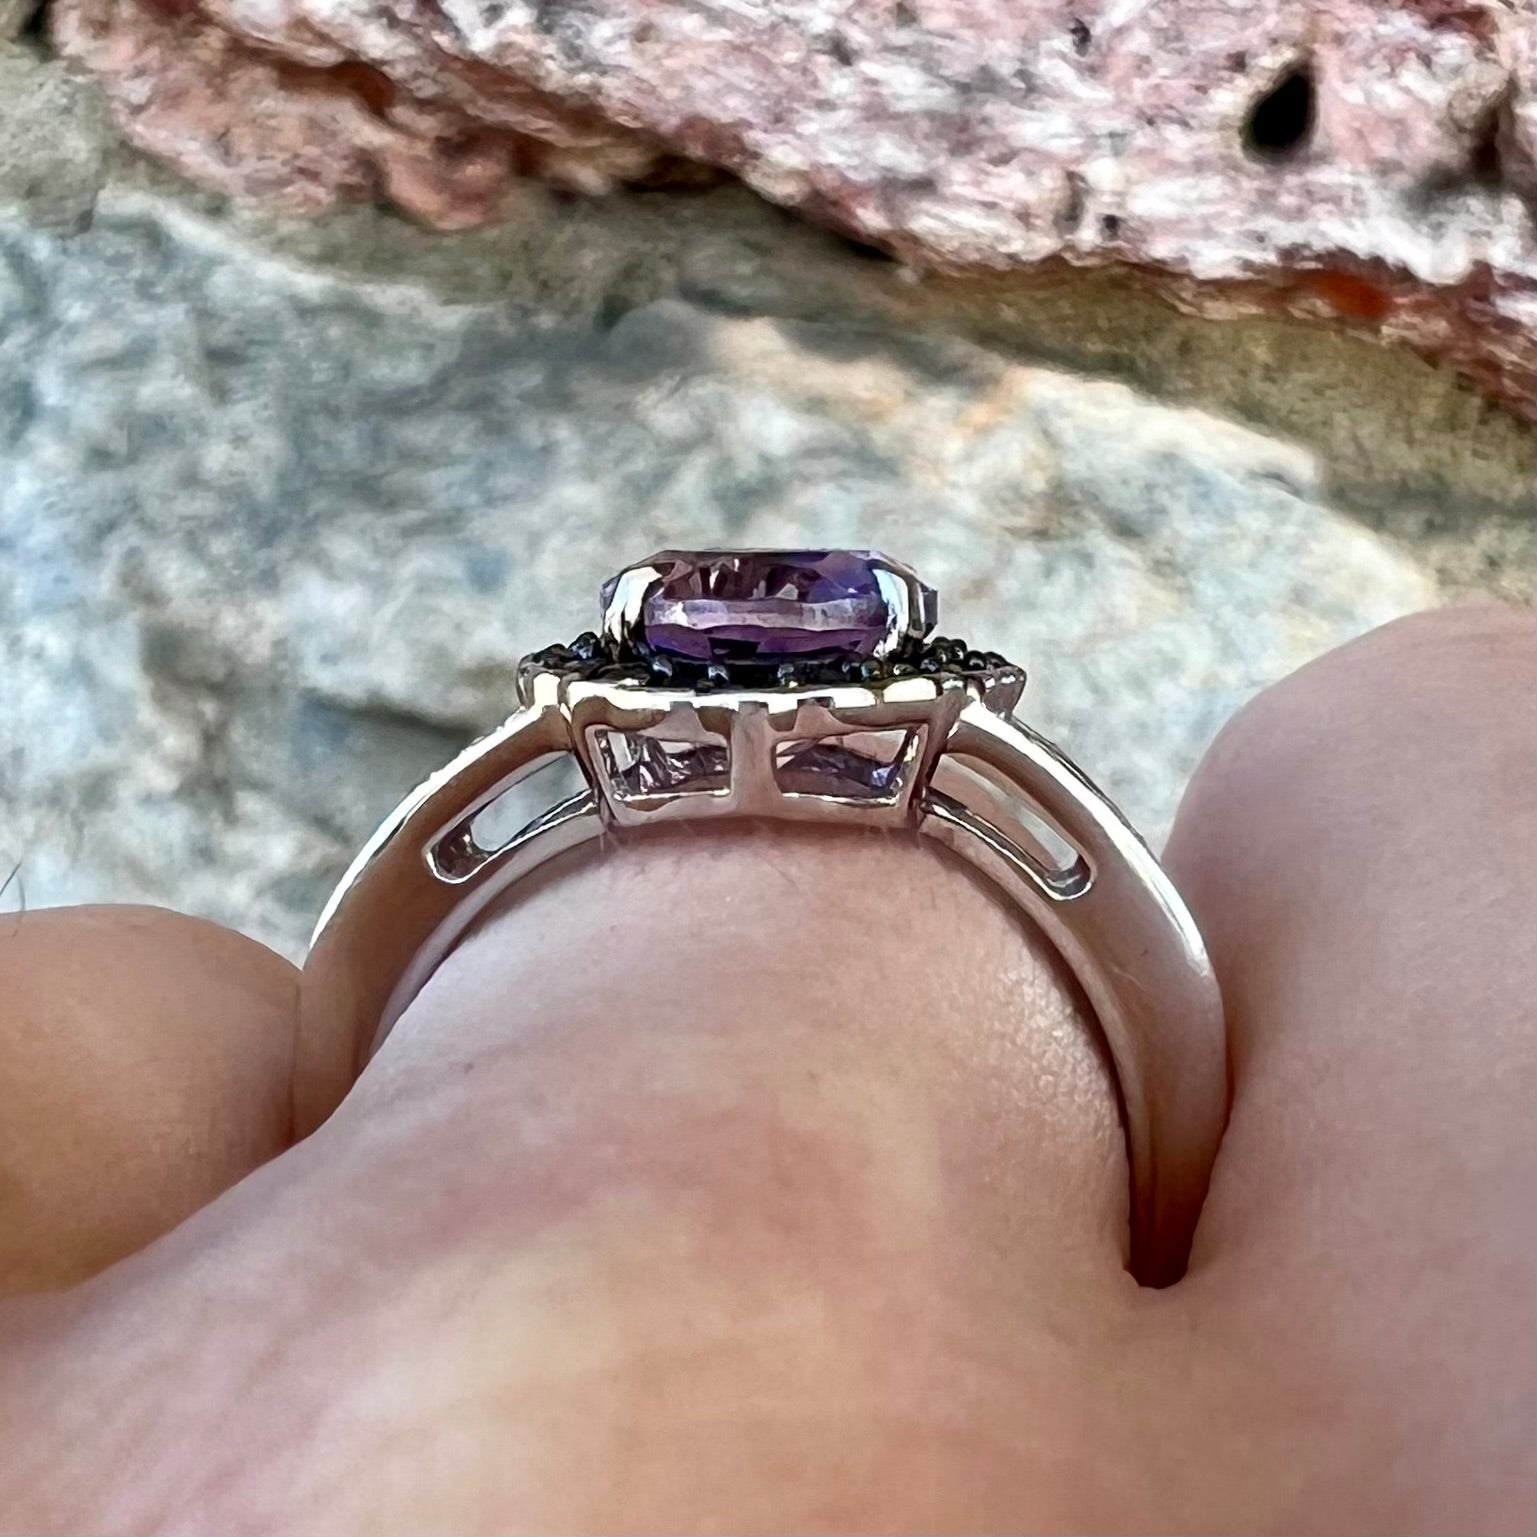 The Glittery Cluster Amethyst Ring